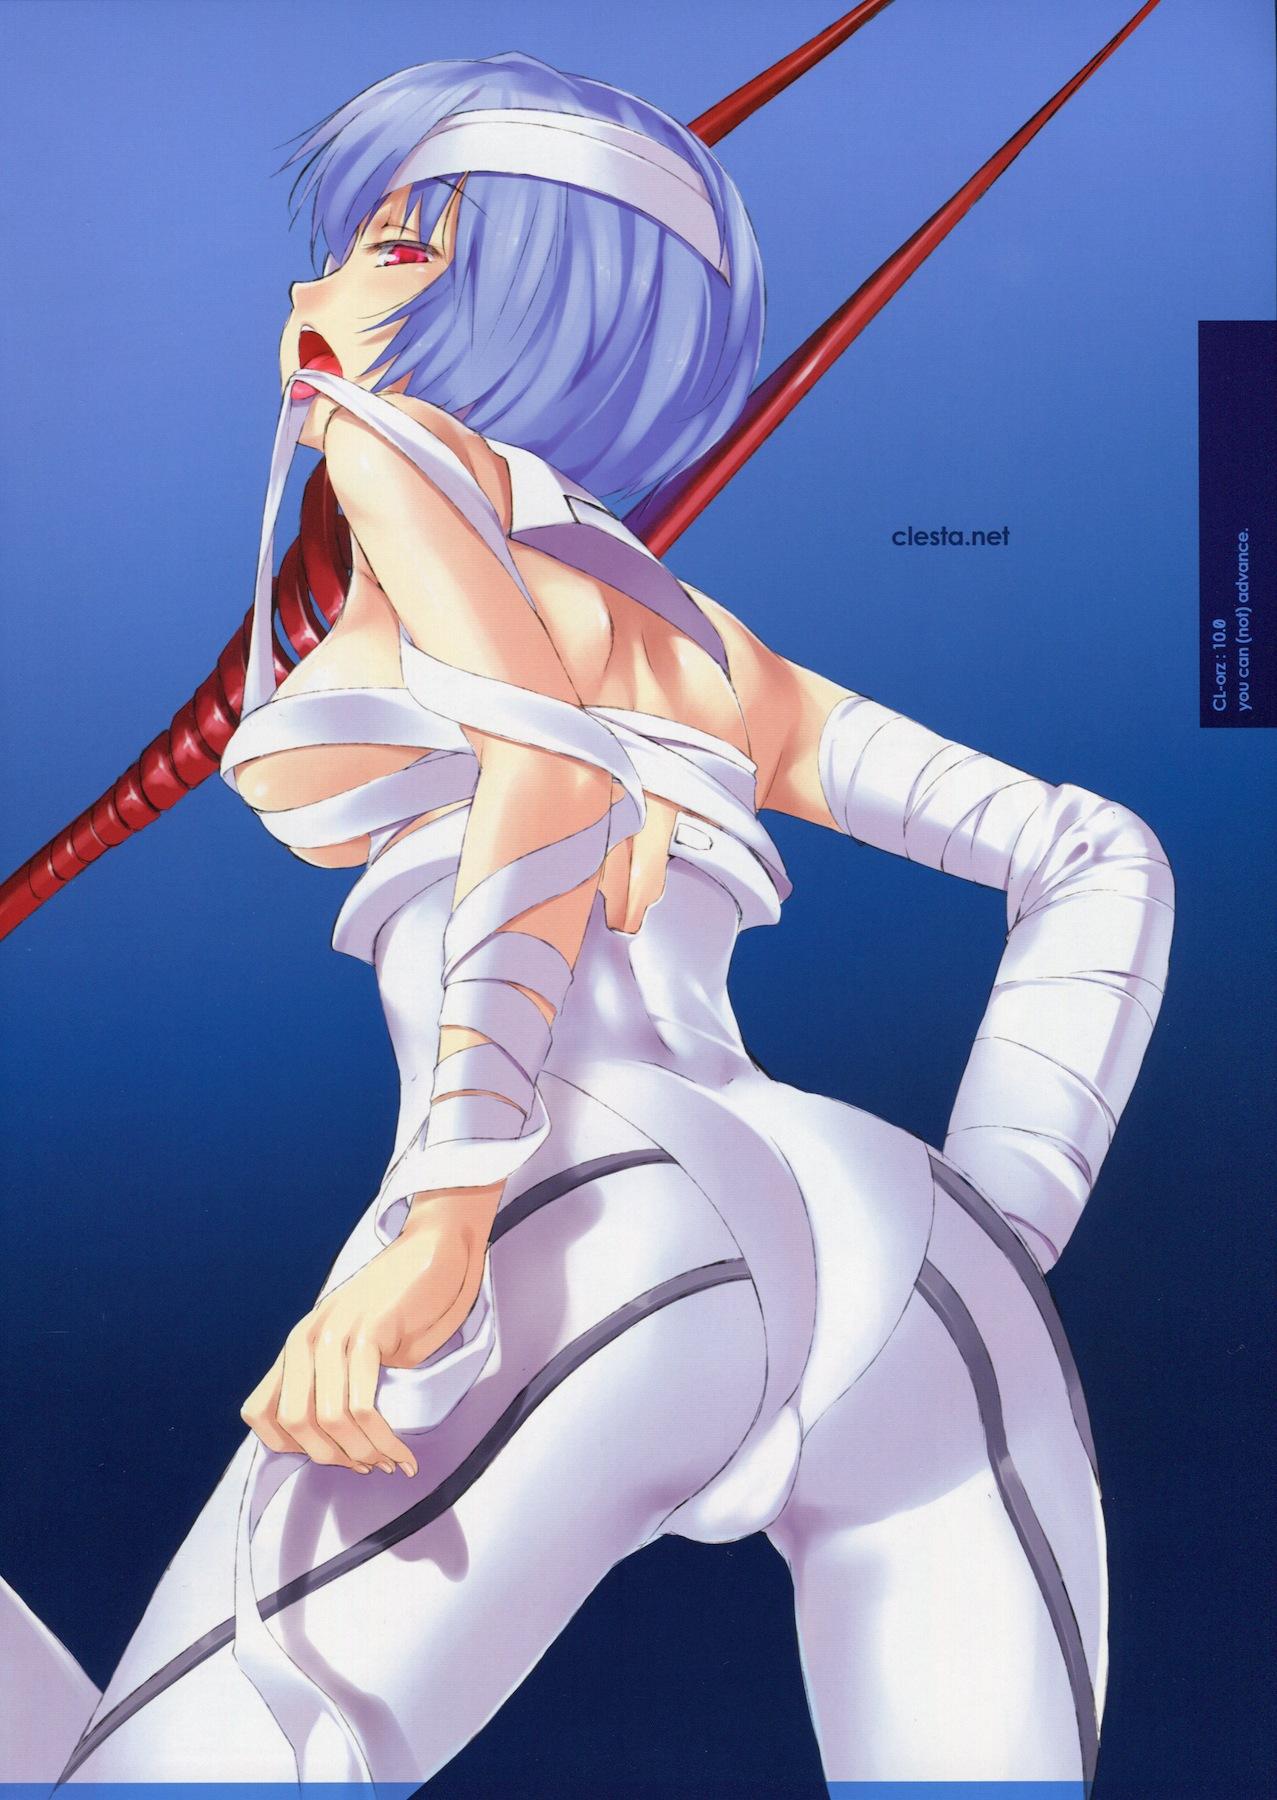 (SC48) [Clesta (Cle Masahiro)] CL-orz:10.0 - you can (not) advance (Rebuild of Evangelion) [Decensored] 15